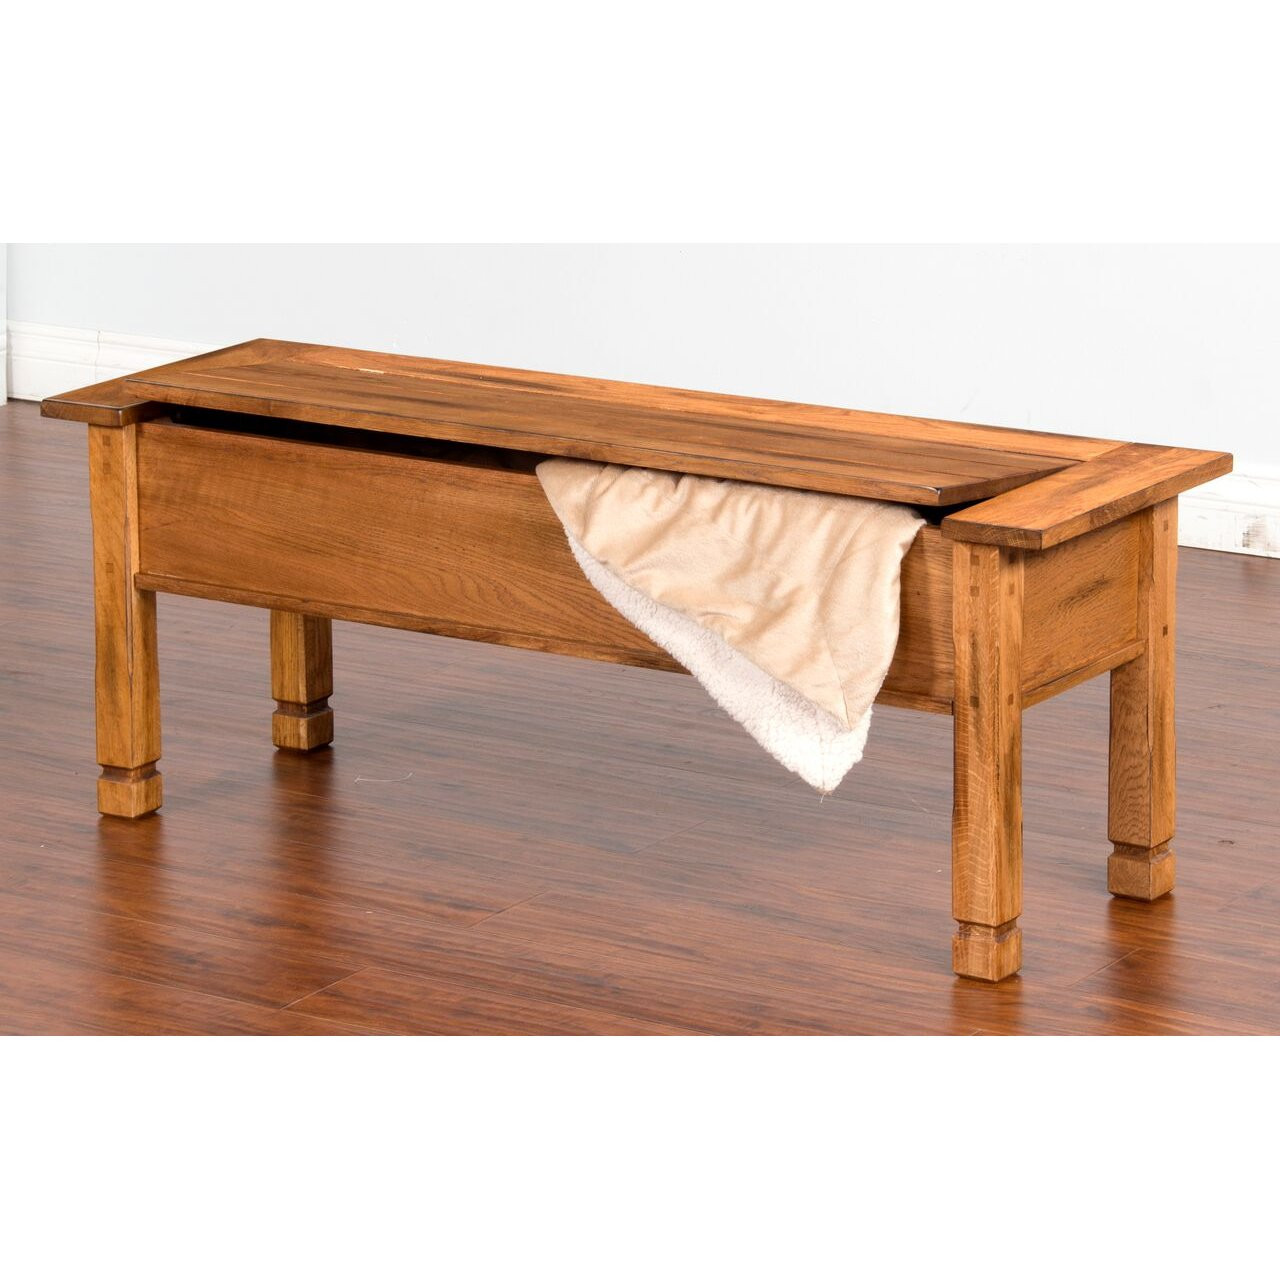 Dining Room Benches With Storage
 Rustic Storage Bench Sedona